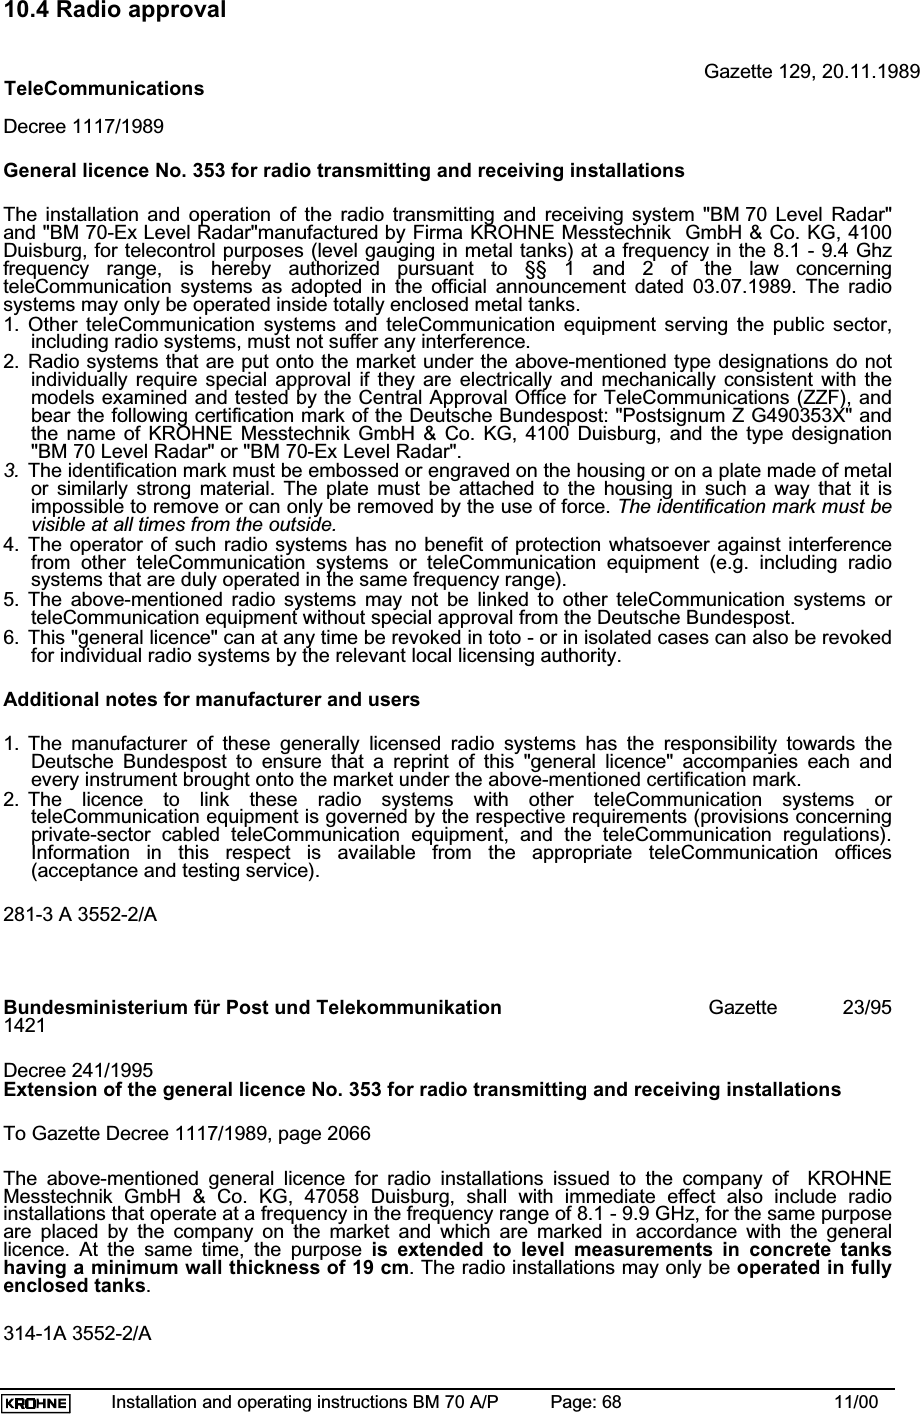 Installation and operating instructions BM 70 A/P Page: 68 11/0010.4 Radio approvalGazette 129, 20.11.1989TeleCommunicationsDecree 1117/1989General licence No. 353 for radio transmitting and receiving installationsThe installation and operation of the radio transmitting and receiving system &quot;BM 70 Level Radar&quot;and &quot;BM 70-Ex Level Radar&quot;manufactured by Firma KROHNE Messtechnik  GmbH &amp; Co. KG, 4100Duisburg, for telecontrol purposes (level gauging in metal tanks) at a frequency in the 8.1 - 9.4 Ghzfrequency range, is hereby authorized pursuant to §§ 1 and 2 of the law concerningteleCommunication systems as adopted in the official announcement dated 03.07.1989. The radiosystems may only be operated inside totally enclosed metal tanks.1. Other teleCommunication systems and teleCommunication equipment serving the public sector,including radio systems, must not suffer any interference.2. Radio systems that are put onto the market under the above-mentioned type designations do notindividually require special approval if they are electrically and mechanically consistent with themodels examined and tested by the Central Approval Office for TeleCommunications (ZZF), andbear the following certification mark of the Deutsche Bundespost: &quot;Postsignum Z G490353X&quot; andthe name of KROHNE Messtechnik GmbH &amp; Co. KG, 4100 Duisburg, and the type designation&quot;BM 70 Level Radar&quot; or &quot;BM 70-Ex Level Radar&quot;.3. The identification mark must be embossed or engraved on the housing or on a plate made of metalor similarly strong material. The plate must be attached to the housing in such a way that it isimpossible to remove or can only be removed by the use of force. The identification mark must bevisible at all times from the outside.4. The operator of such radio systems has no benefit of protection whatsoever against interferencefrom other teleCommunication systems or teleCommunication equipment (e.g. including radiosystems that are duly operated in the same frequency range).5. The above-mentioned radio systems may not be linked to other teleCommunication systems orteleCommunication equipment without special approval from the Deutsche Bundespost.6. This &quot;general licence&quot; can at any time be revoked in toto - or in isolated cases can also be revokedfor individual radio systems by the relevant local licensing authority.Additional notes for manufacturer and users1. The manufacturer of these generally licensed radio systems has the responsibility towards theDeutsche Bundespost to ensure that a reprint of this &quot;general licence&quot; accompanies each andevery instrument brought onto the market under the above-mentioned certification mark.2. The licence to link these radio systems with other teleCommunication systems orteleCommunication equipment is governed by the respective requirements (provisions concerningprivate-sector cabled teleCommunication equipment, and the teleCommunication regulations).Information in this respect is available from the appropriate teleCommunication offices(acceptance and testing service).281-3 A 3552-2/ABundesministerium für Post und Telekommunikation Gazette         23/951421Decree 241/1995Extension of the general licence No. 353 for radio transmitting and receiving installationsTo Gazette Decree 1117/1989, page 2066The above-mentioned general licence for radio installations issued to the company of  KROHNEMesstechnik GmbH &amp; Co. KG, 47058 Duisburg, shall with immediate effect also include radioinstallations that operate at a frequency in the frequency range of 8.1 - 9.9 GHz, for the same purposeare placed by the company on the market and which are marked in accordance with the generallicence. At the same time, the purpose is extended to level measurements in concrete tankshaving a minimum wall thickness of 19 cm. The radio installations may only be operated in fullyenclosed tanks.314-1A 3552-2/A